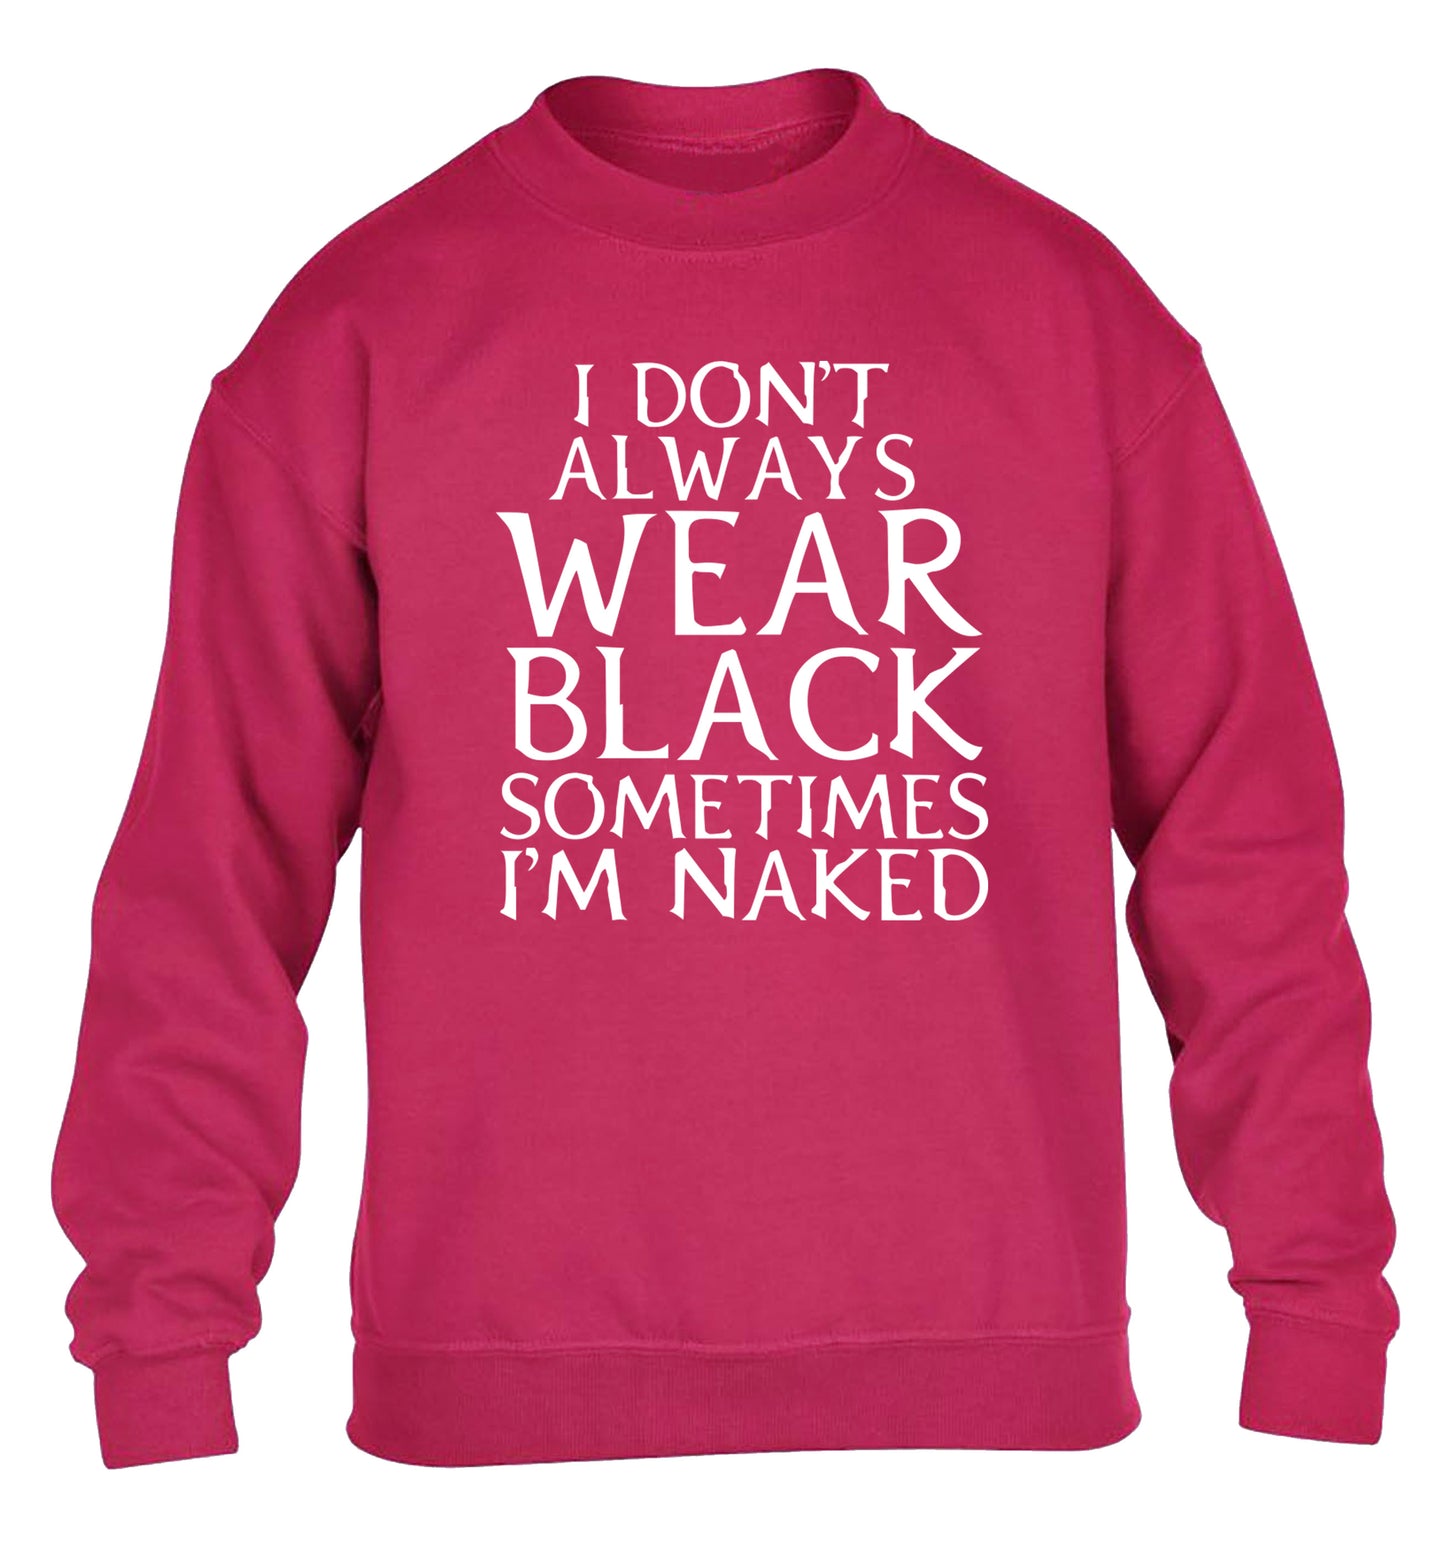 I don't always wear black sometimes I'm naked children's pink sweater 12-13 Years